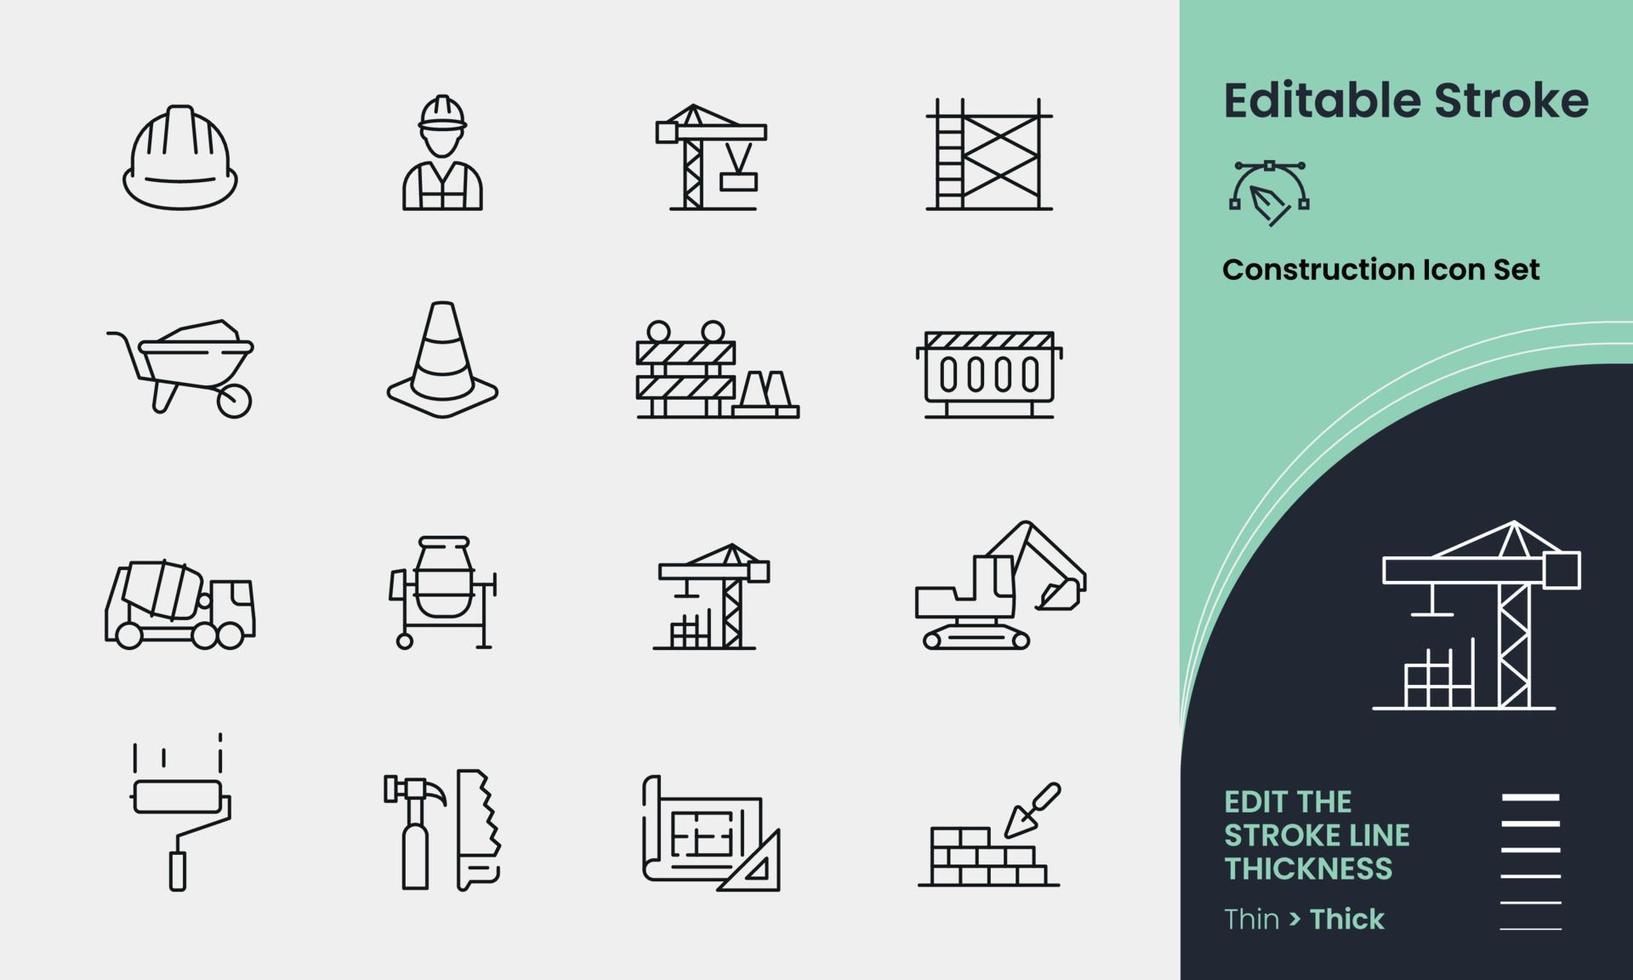 Construction Icon collection containing 16 editable stroke icons. Perfect for logos, stats and infographics. Change the thickness of the line in any vector capable app.